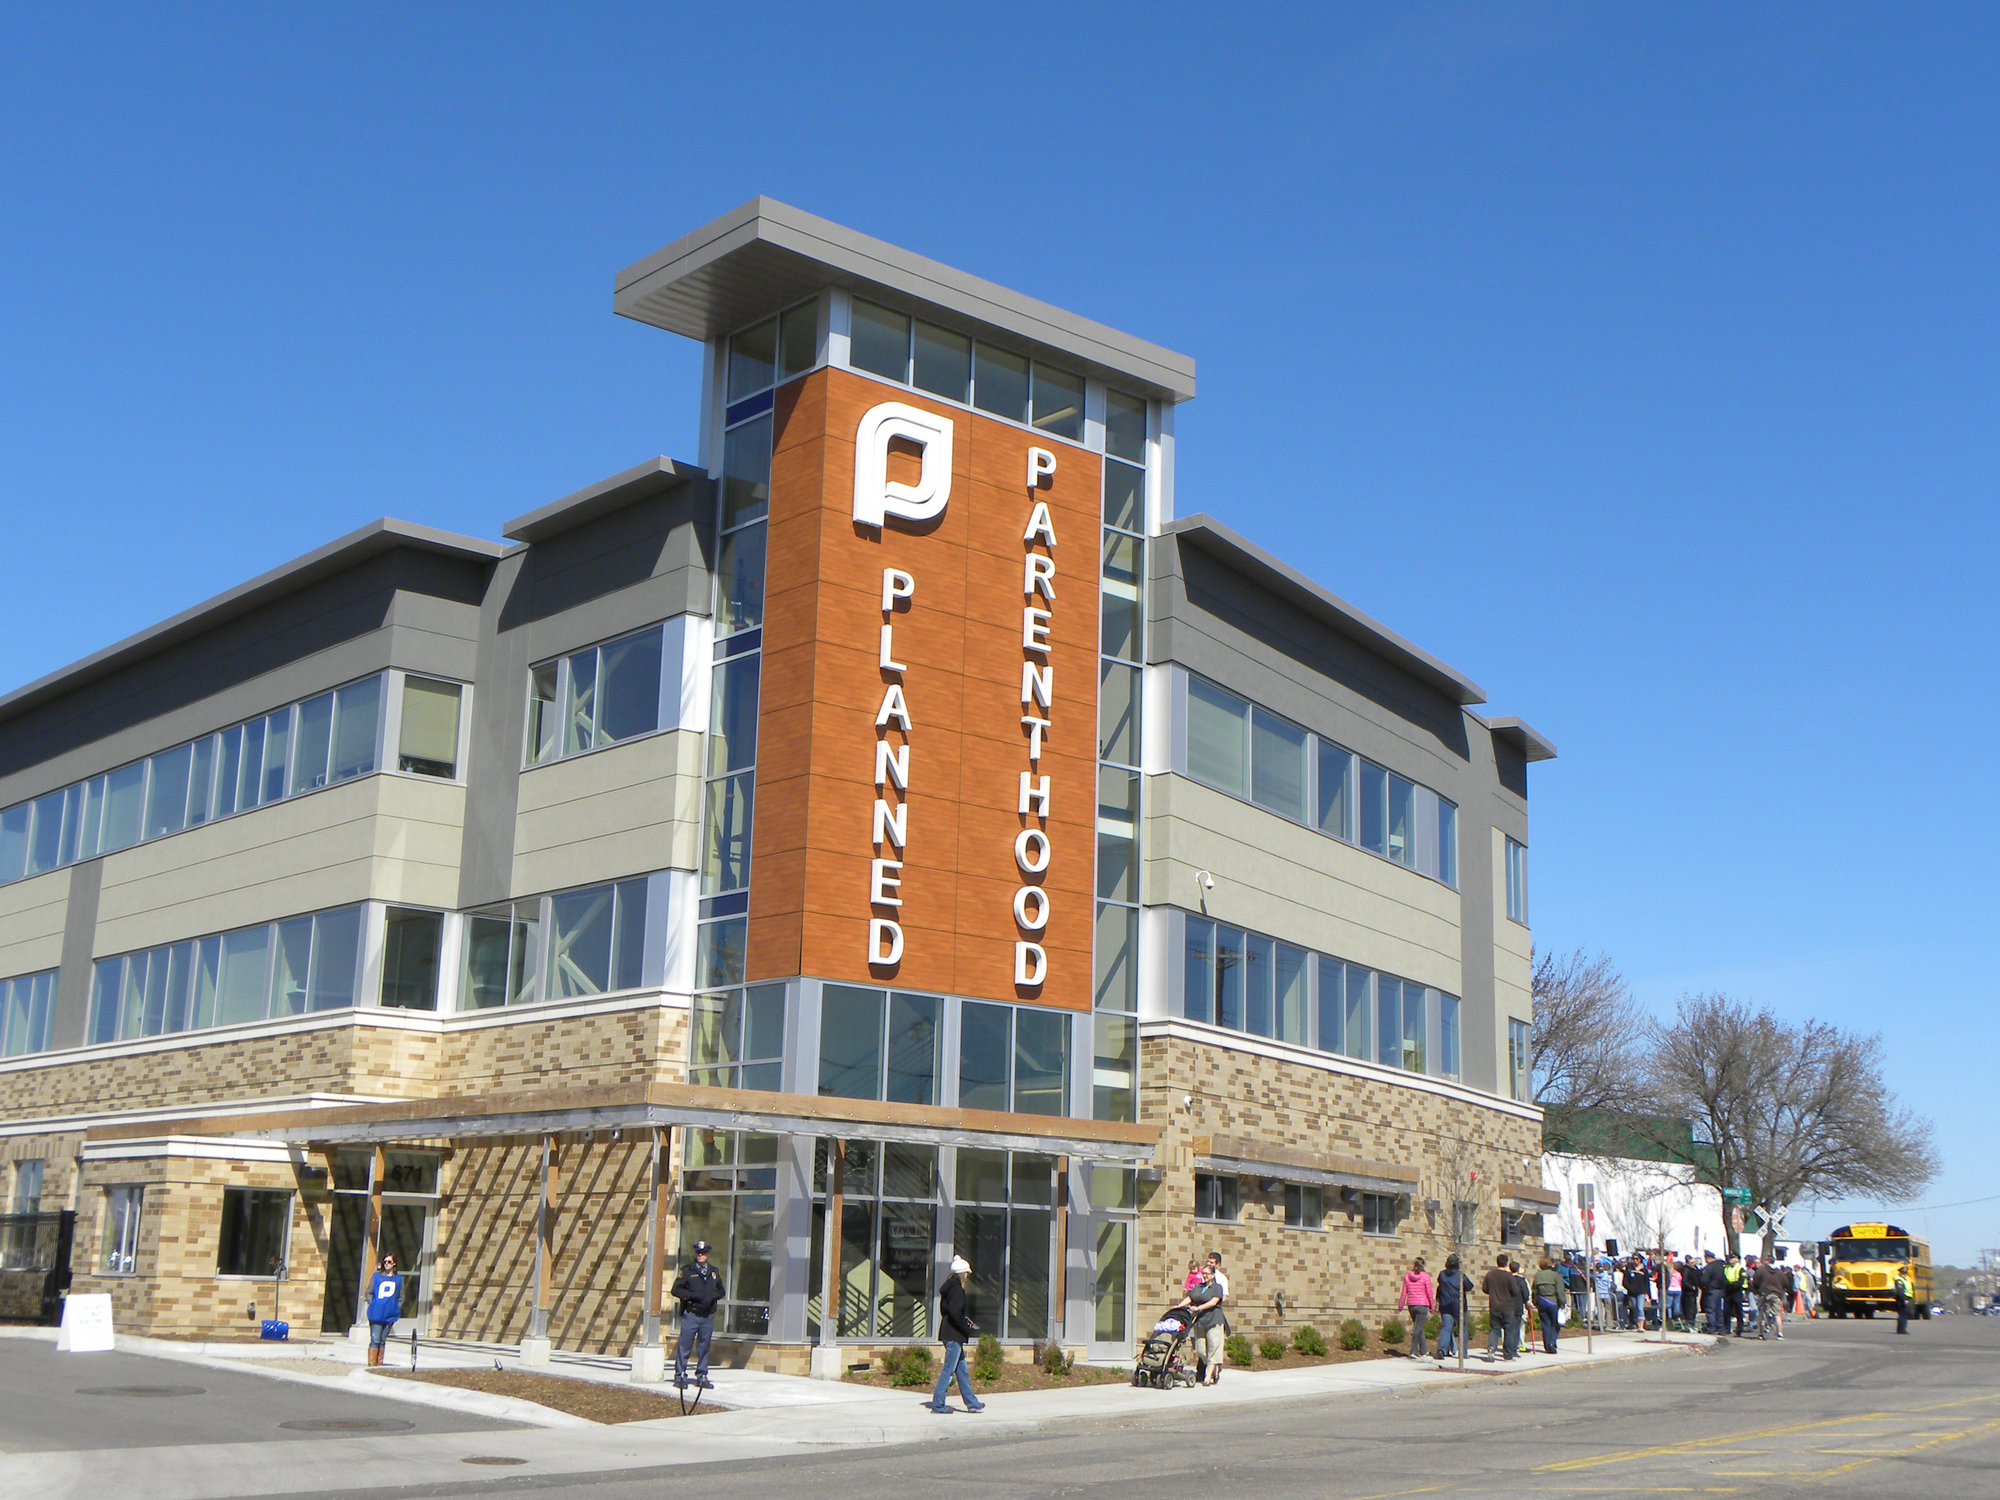 planned parenthood clinic